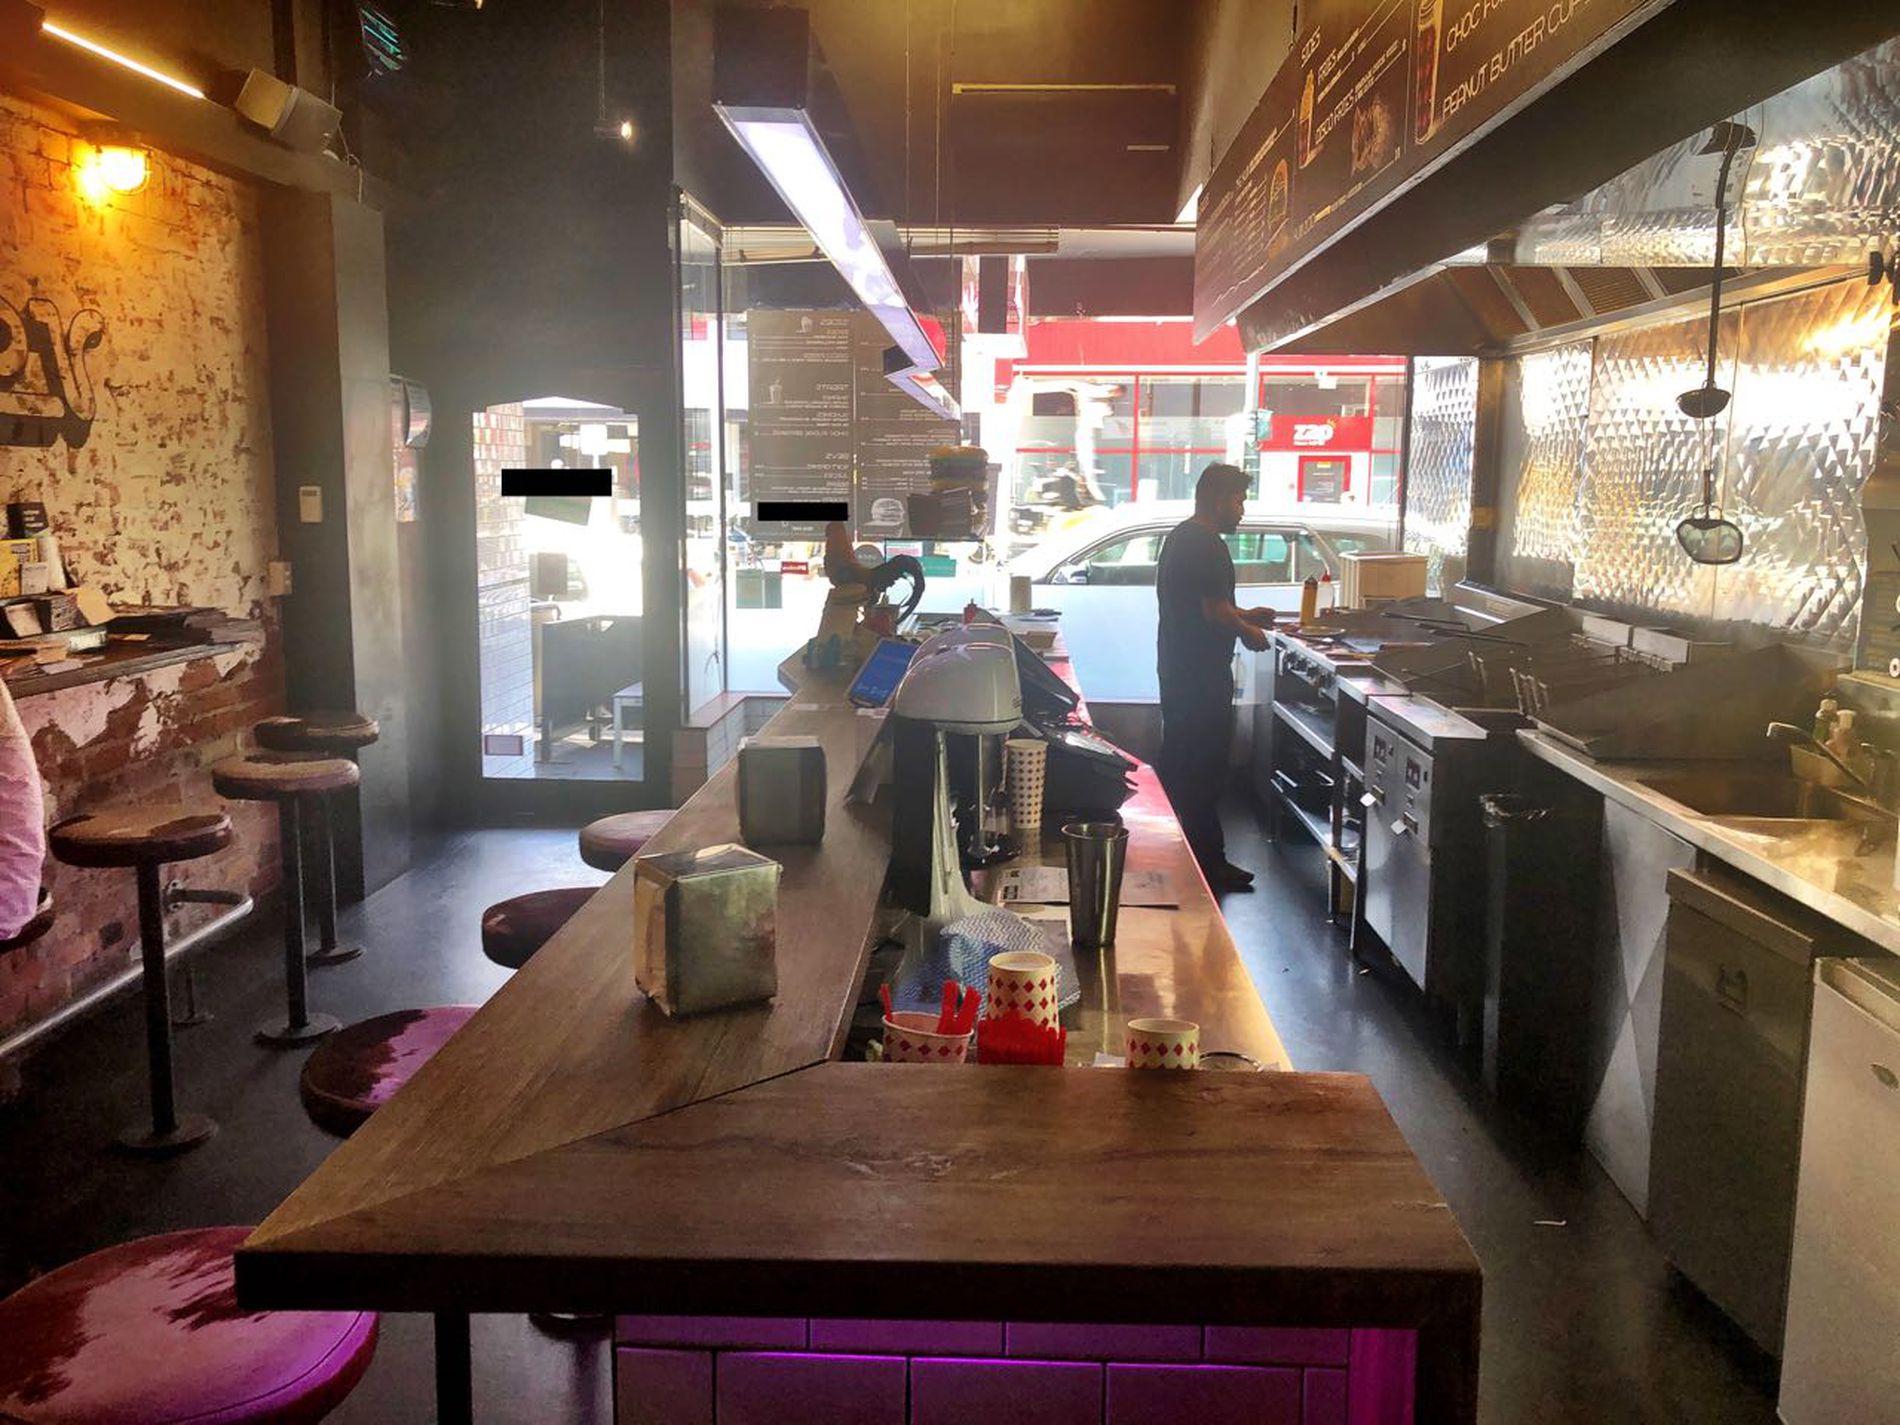 Takeaway Burger Bar Business For Sale